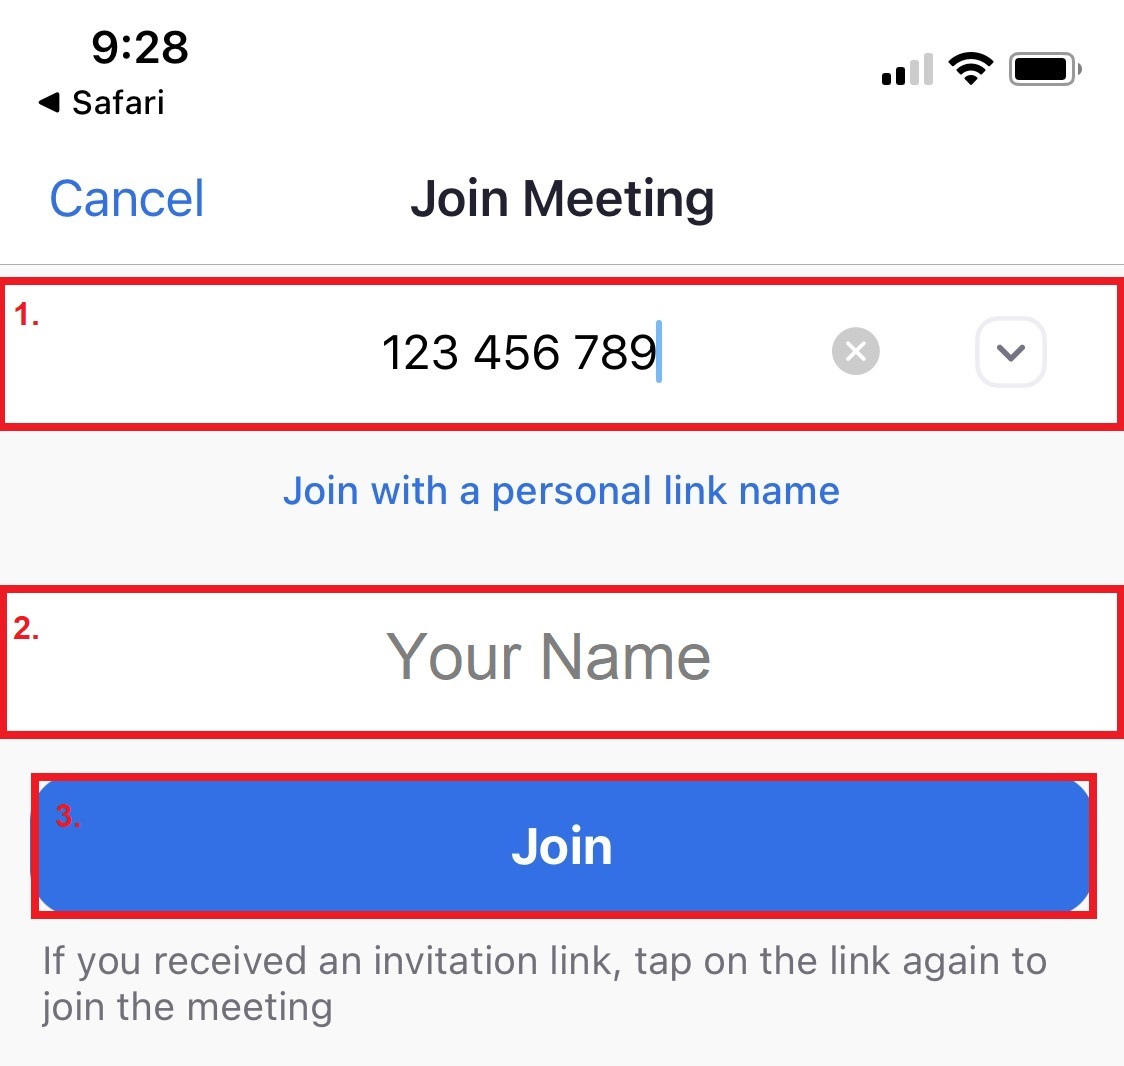 Add the Meeting ID and select Join